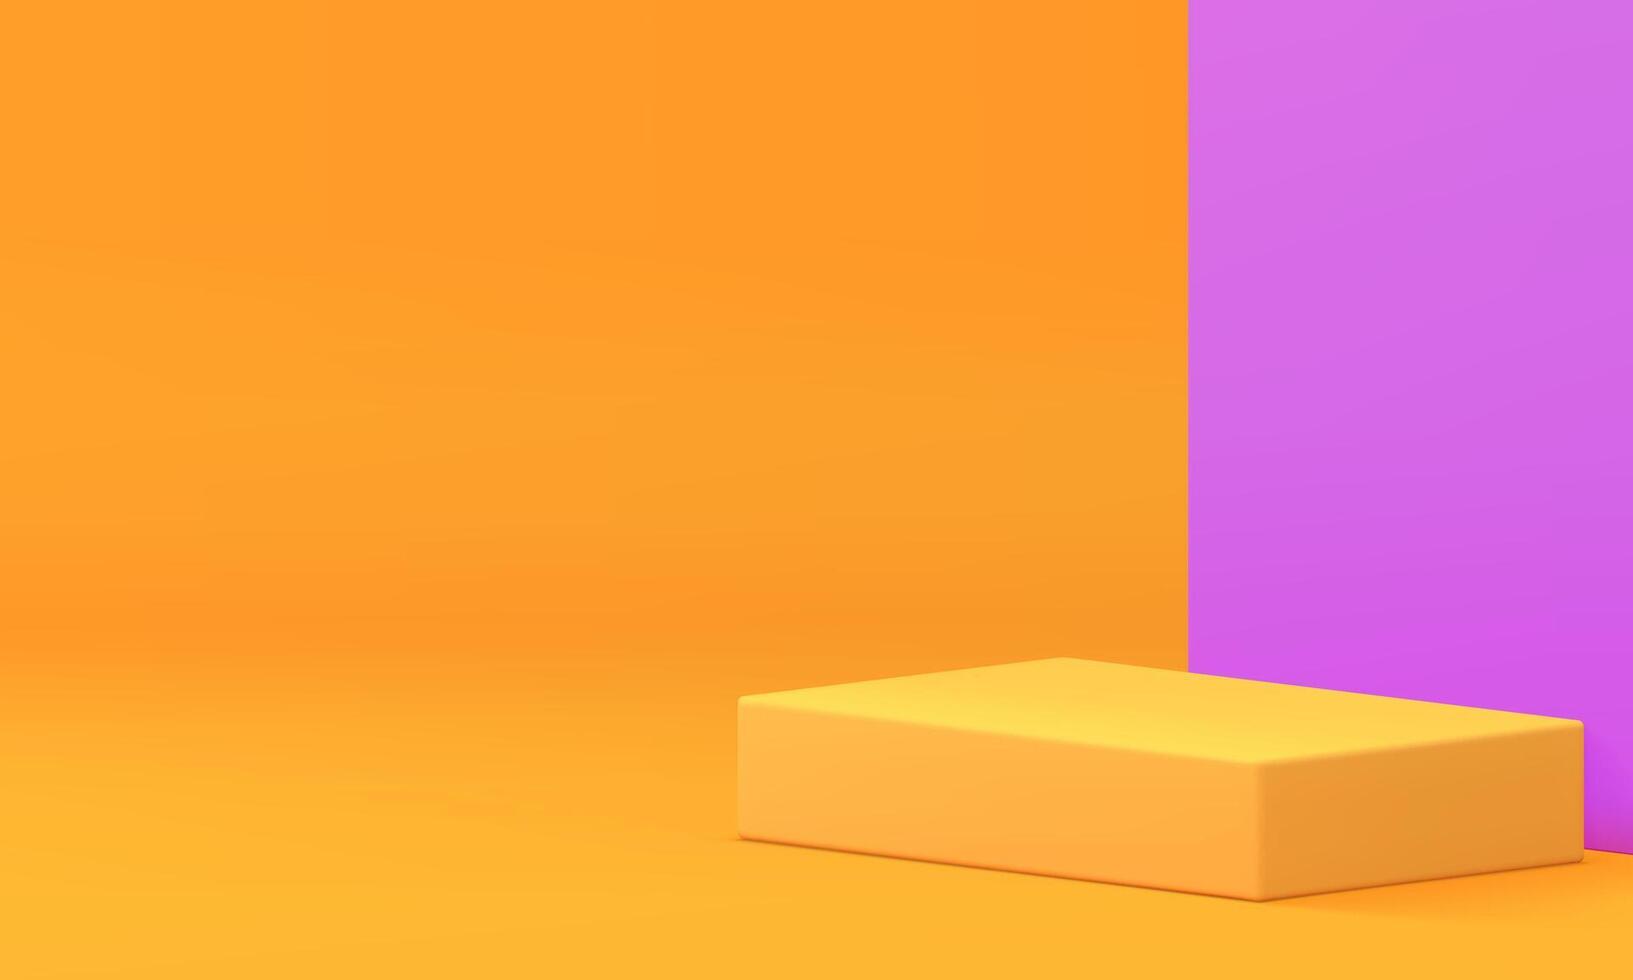 3d podium pedestal rectangle bright yellow stand with purple wall background realistic vector